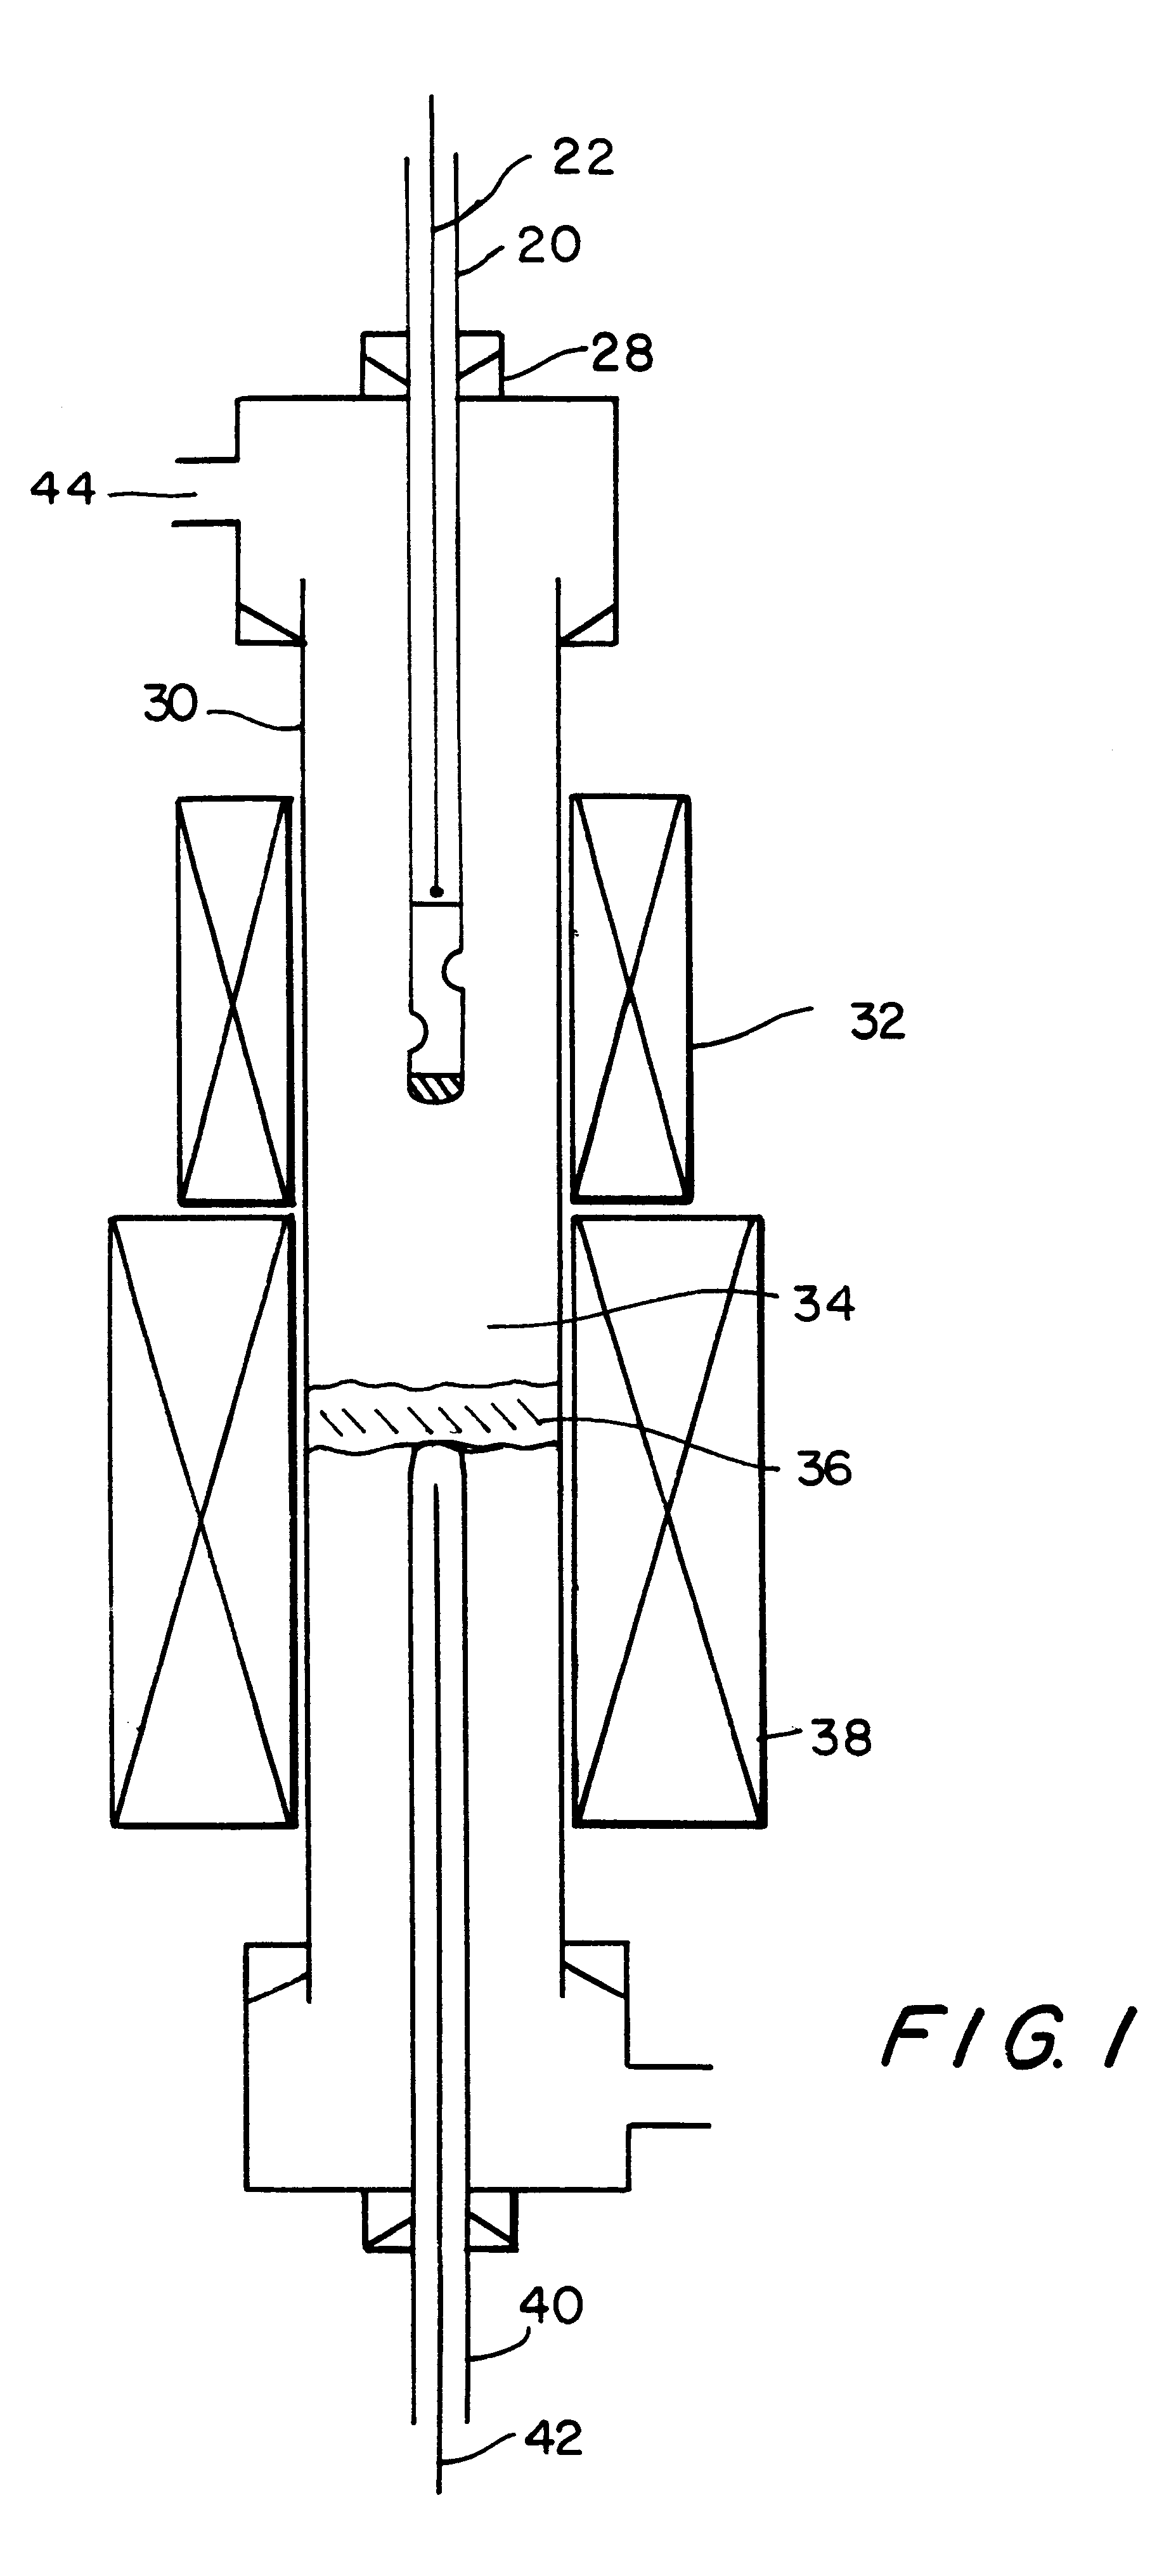 Process for producing single wall nanotubes using unsupported metal catalysts